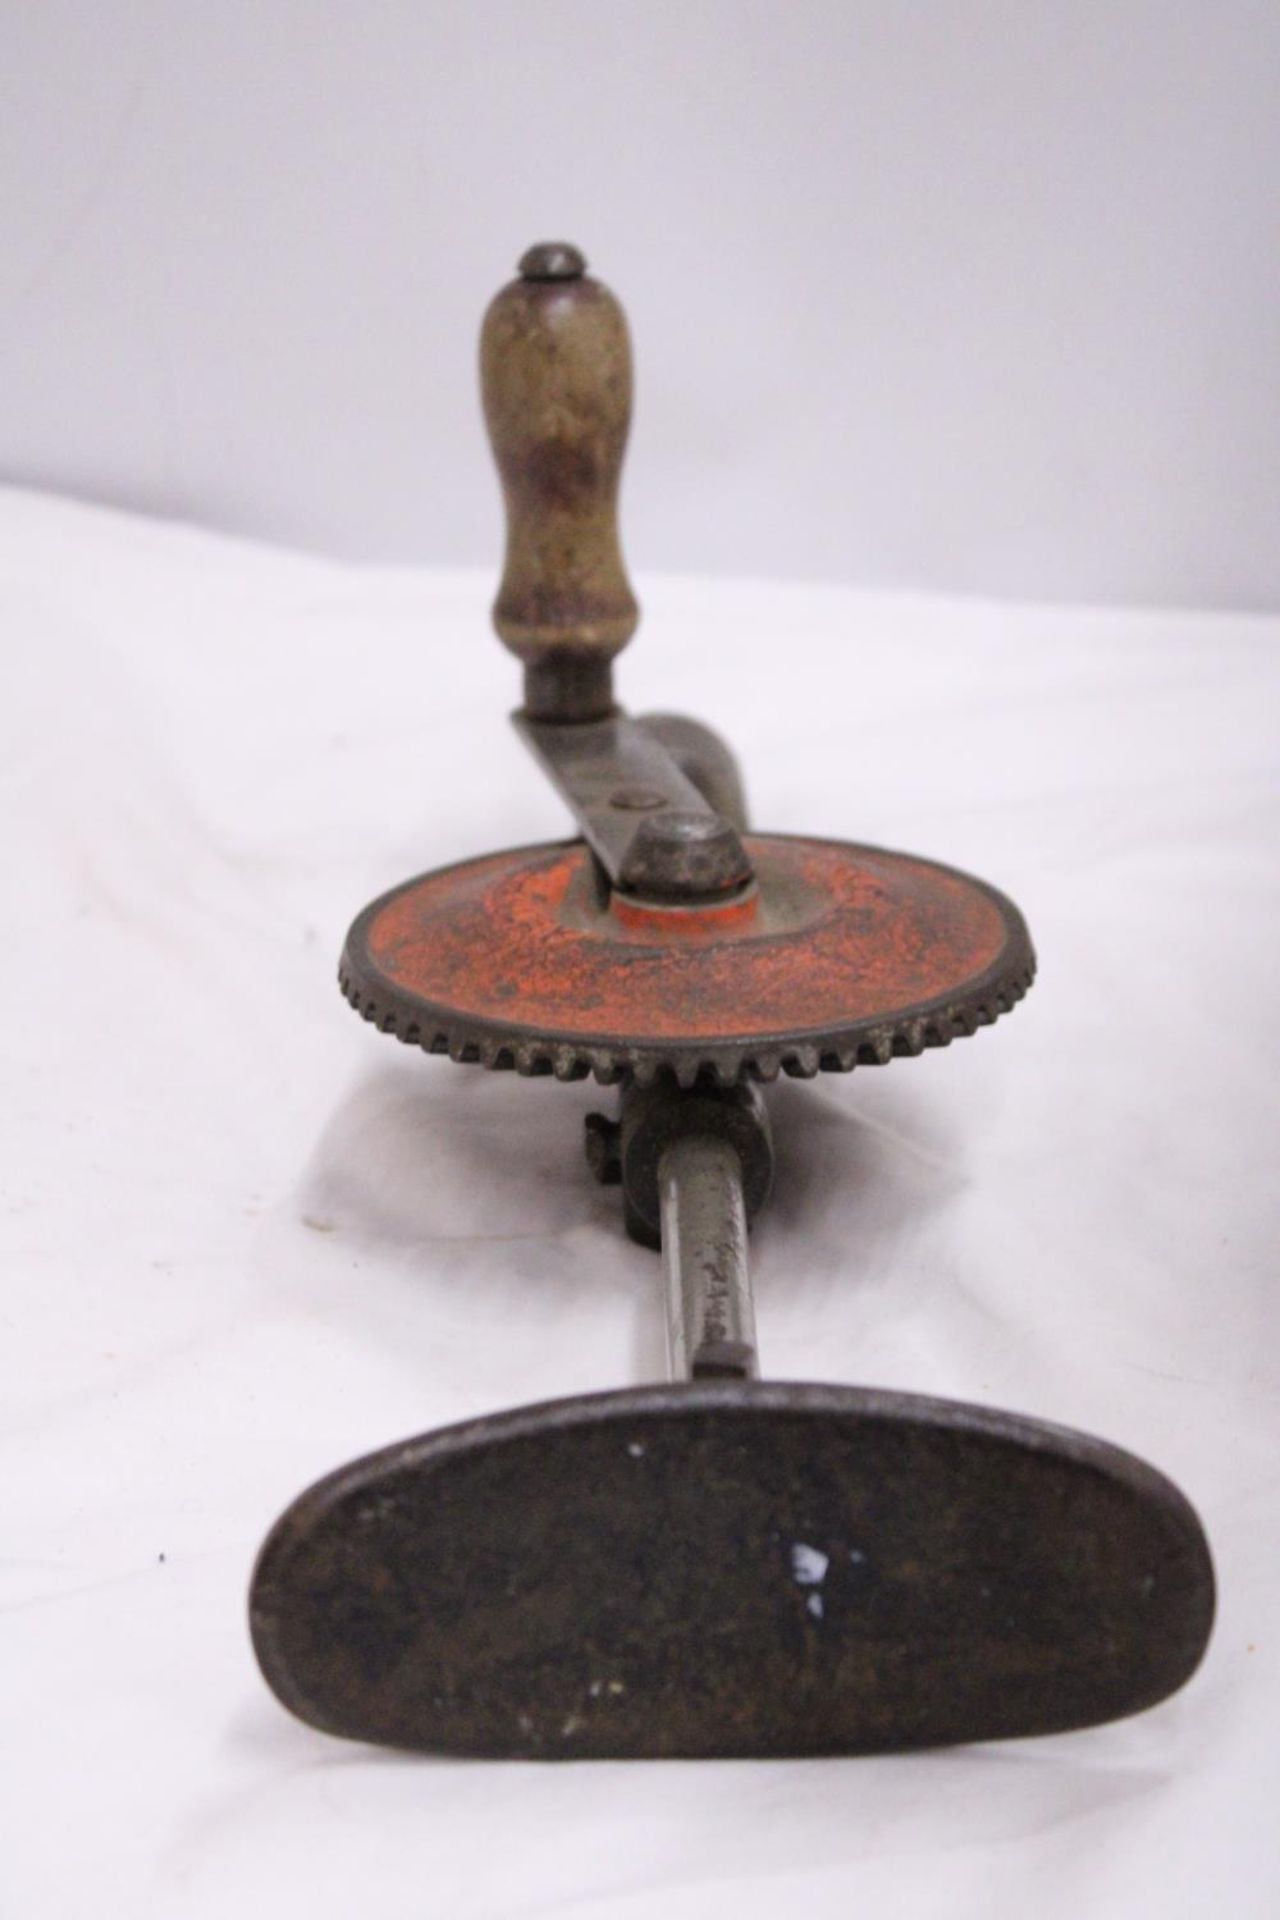 A VINTAGE STANLEY HAND DRILL - Image 5 of 5